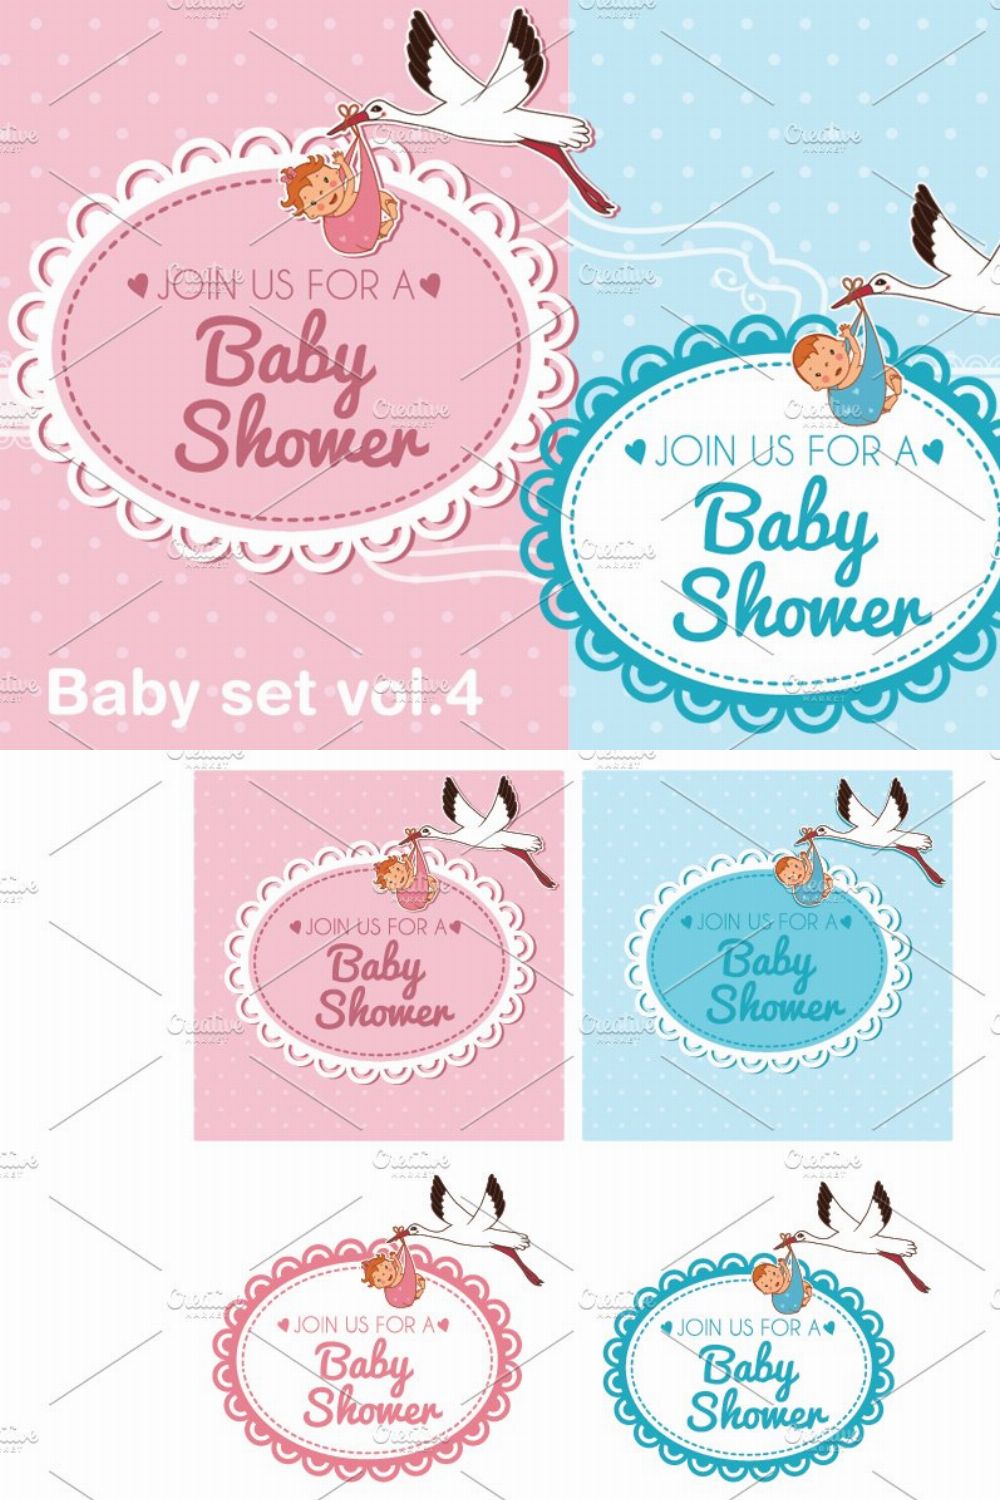 Baby set vol.4 pinterest preview image.